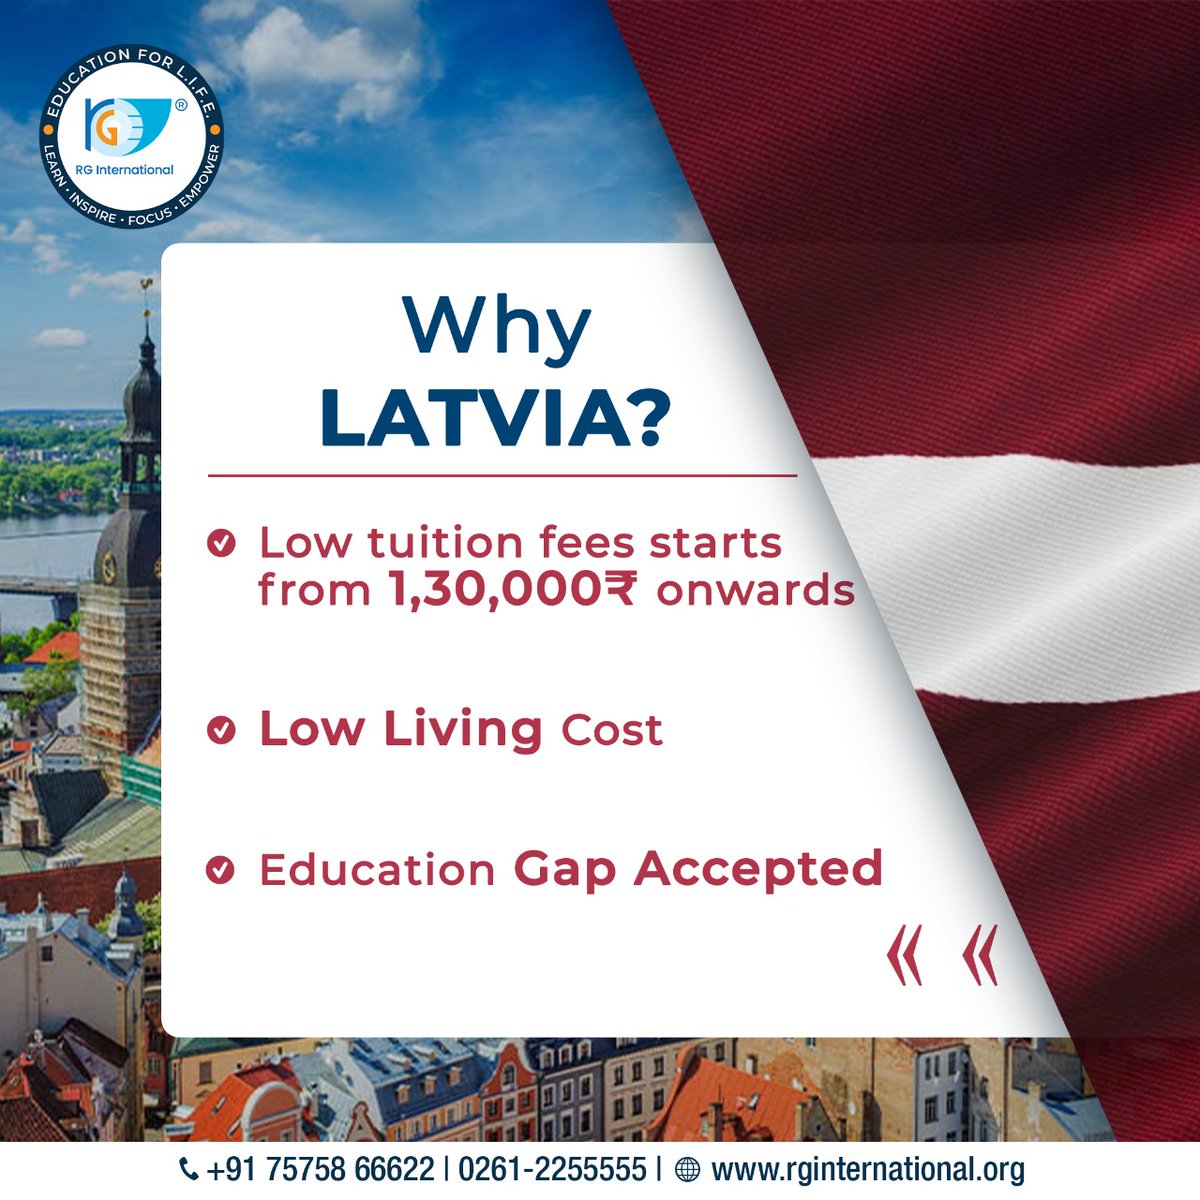 Latvia is a friendly and welcoming country.
The price for living & studying in Latvia are reasonable allowing students to afford more for less. 

🌐 rginternational.org

#studyinlatvia #latvia🇱🇻 #latviatravel #latviannature #suratcity #education #educationabroad #abroadcareer